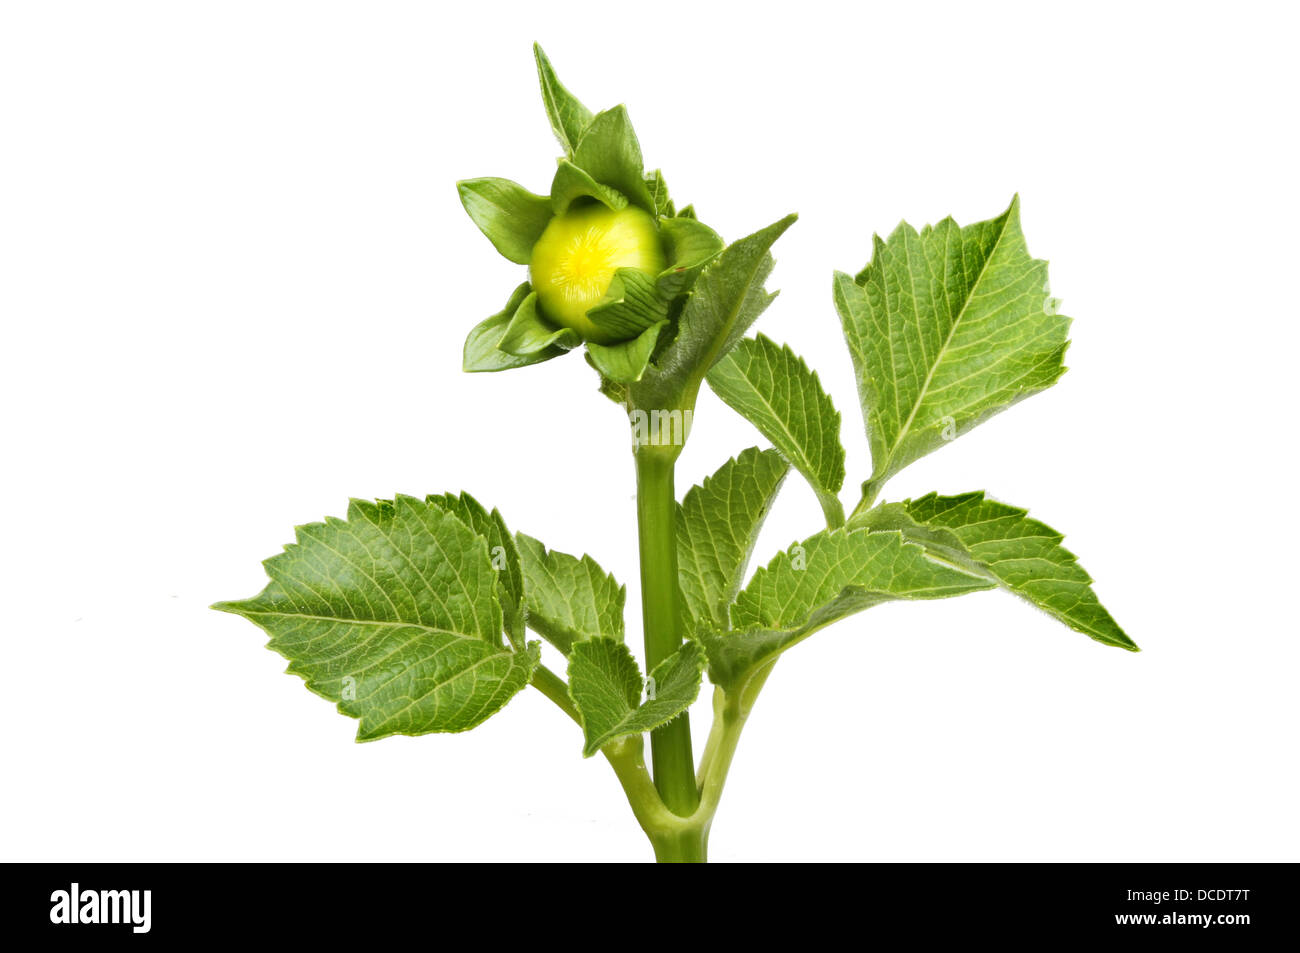 Dahlia flower bud and green fleshy leaves isolated against white Stock Photo